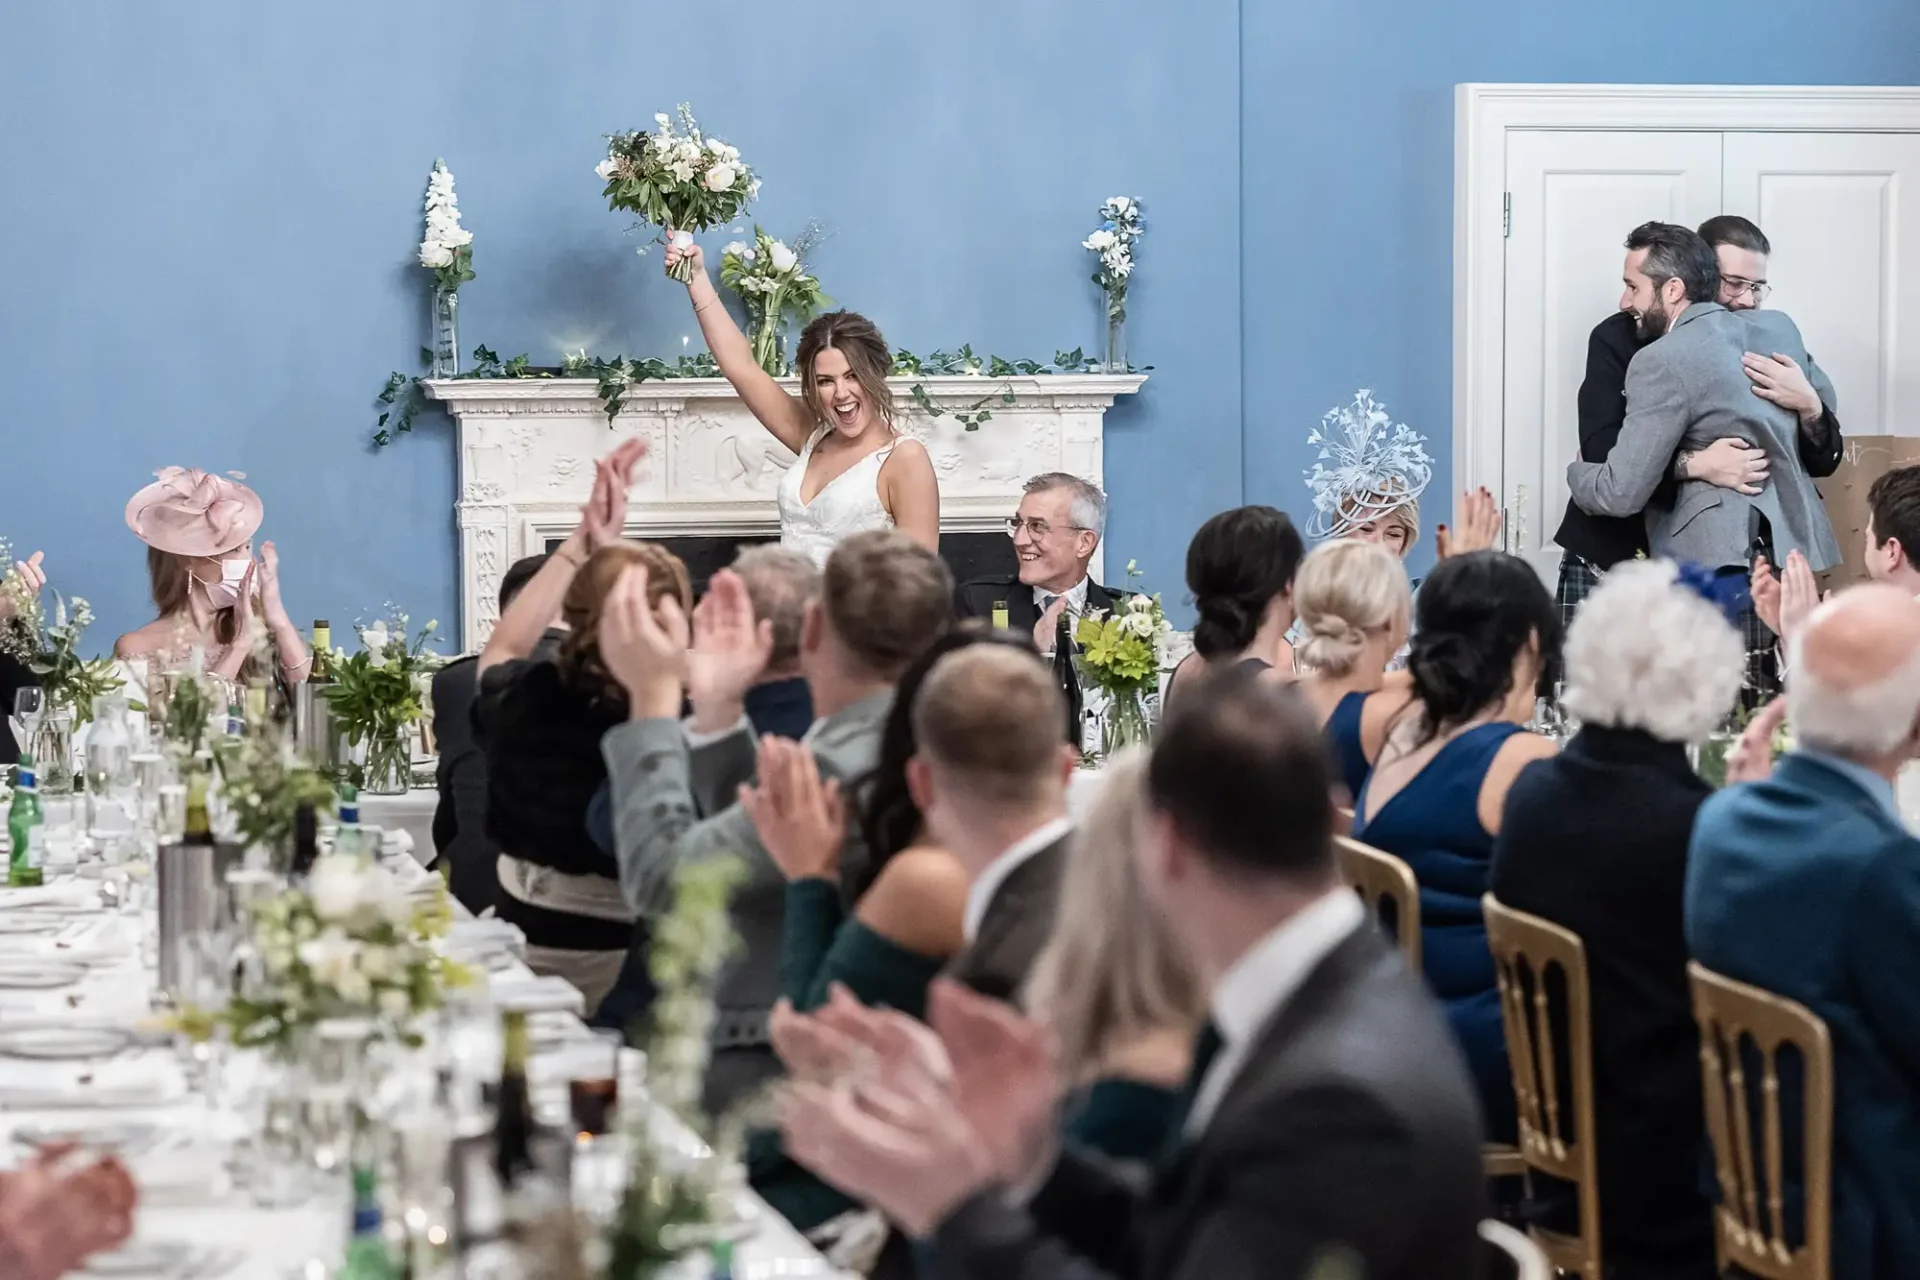 A bride joyfully tossing her bouquet to guests at a wedding reception in an elegantly decorated room with blue walls.